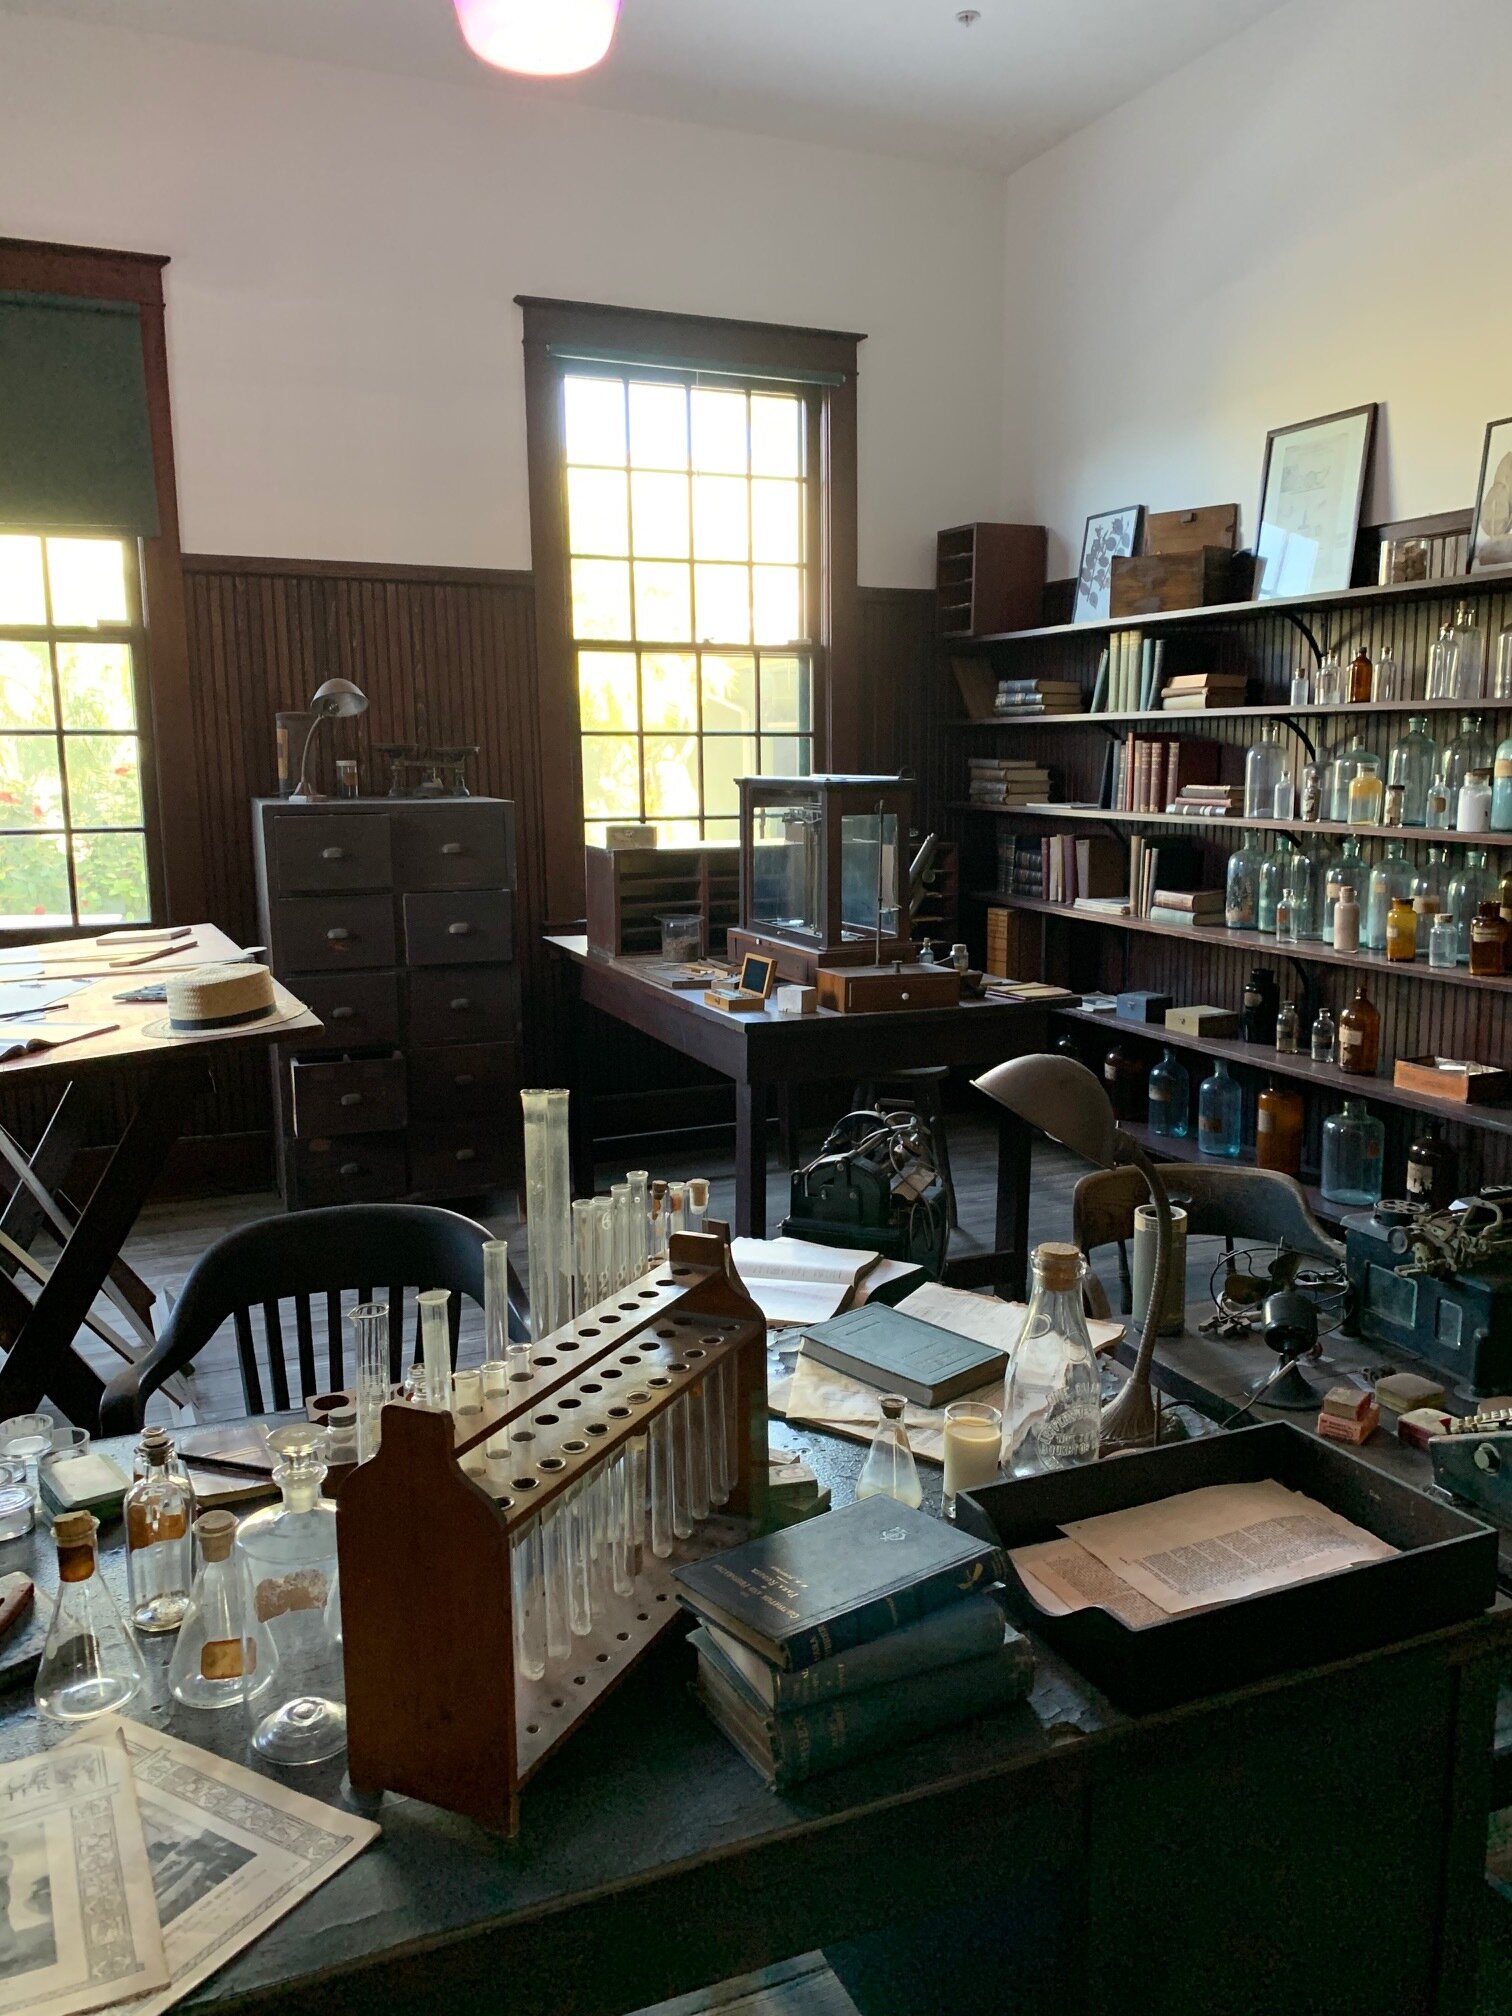  This was Thomas Edison’s office, next door to his summer home in Fort Myers. Did you know Edison didn’t actually invent the light bulb? He improved upon it so that it would burn for several hours. His version was considered the first commercially pr